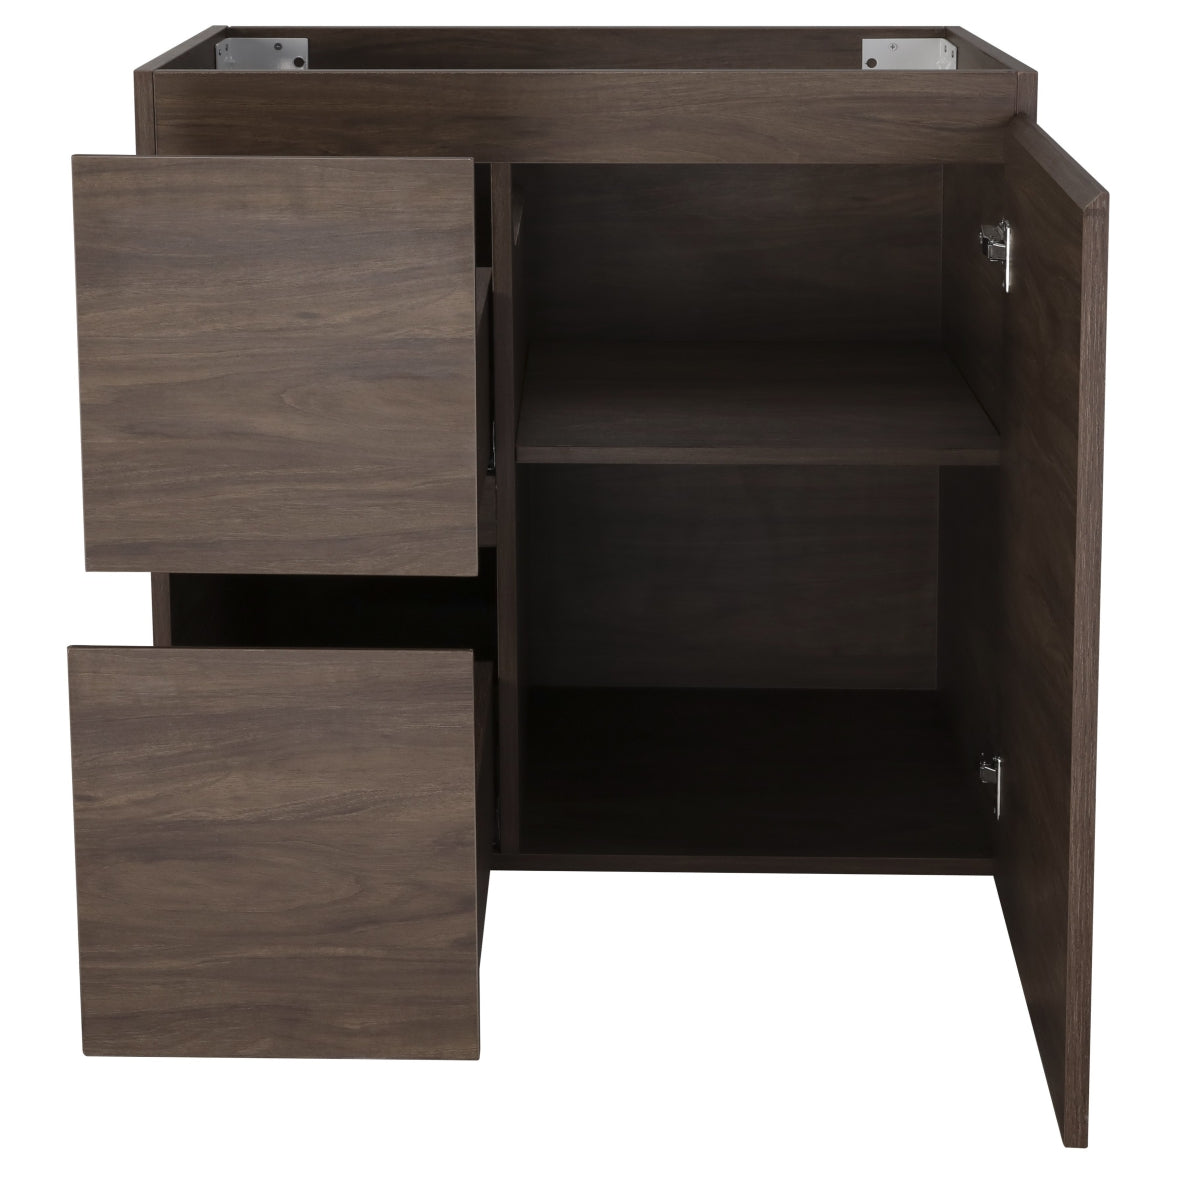 Avisé 750mm Floor Standing Vanity Cabinet with Drawers on the Left Side | Acacia Ash Woodgrain |